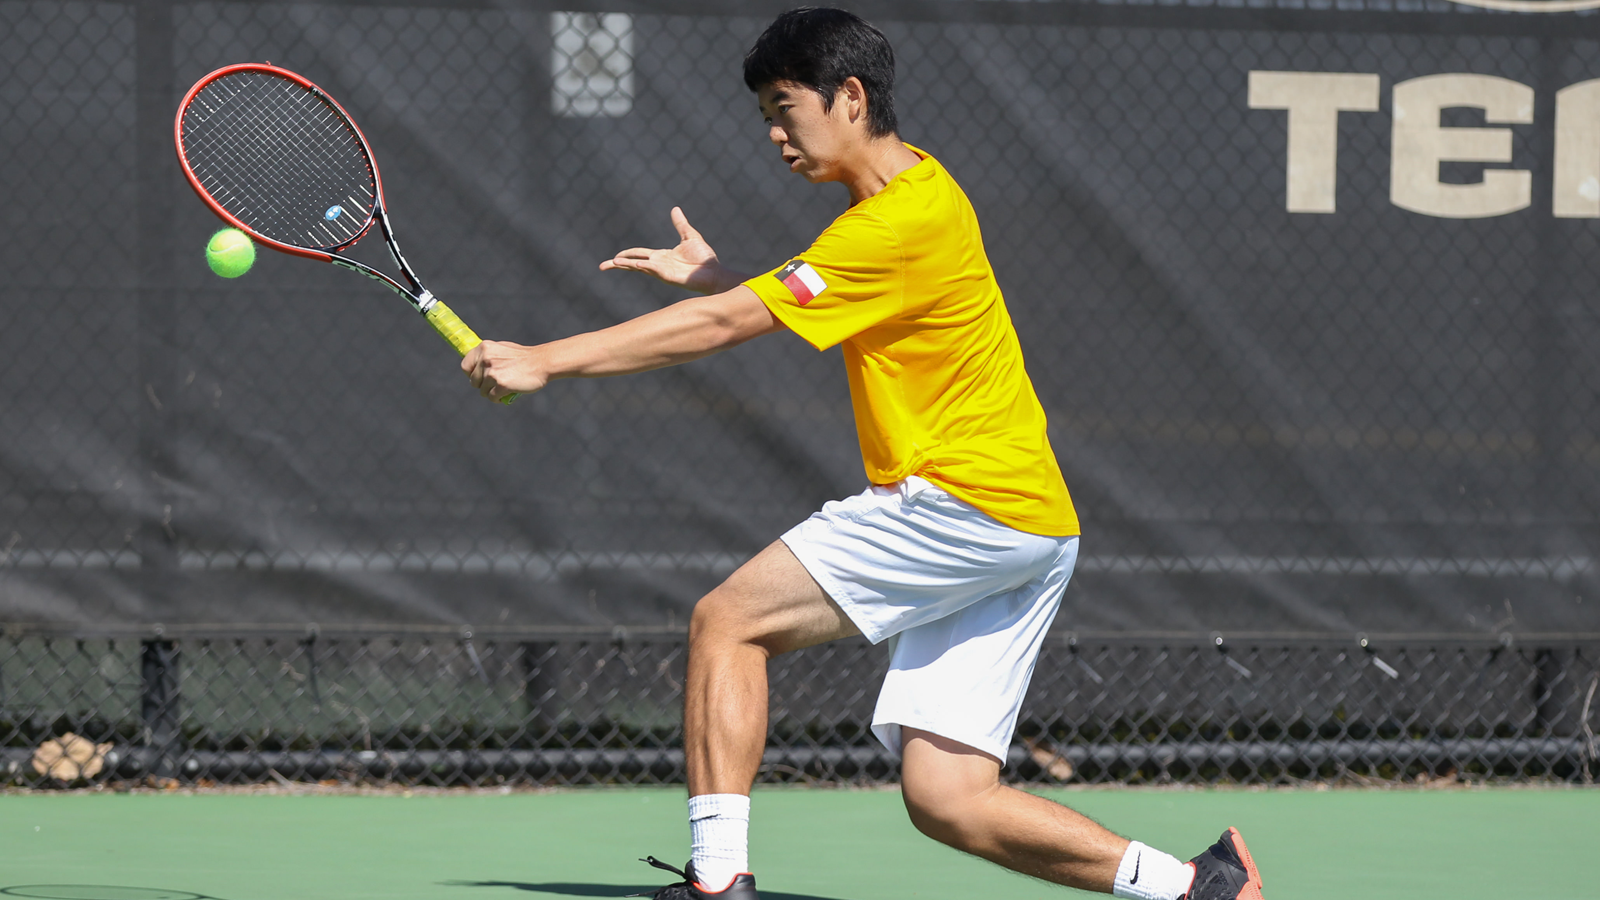 Pirates push past Blugolds on Tuesday, 8-1